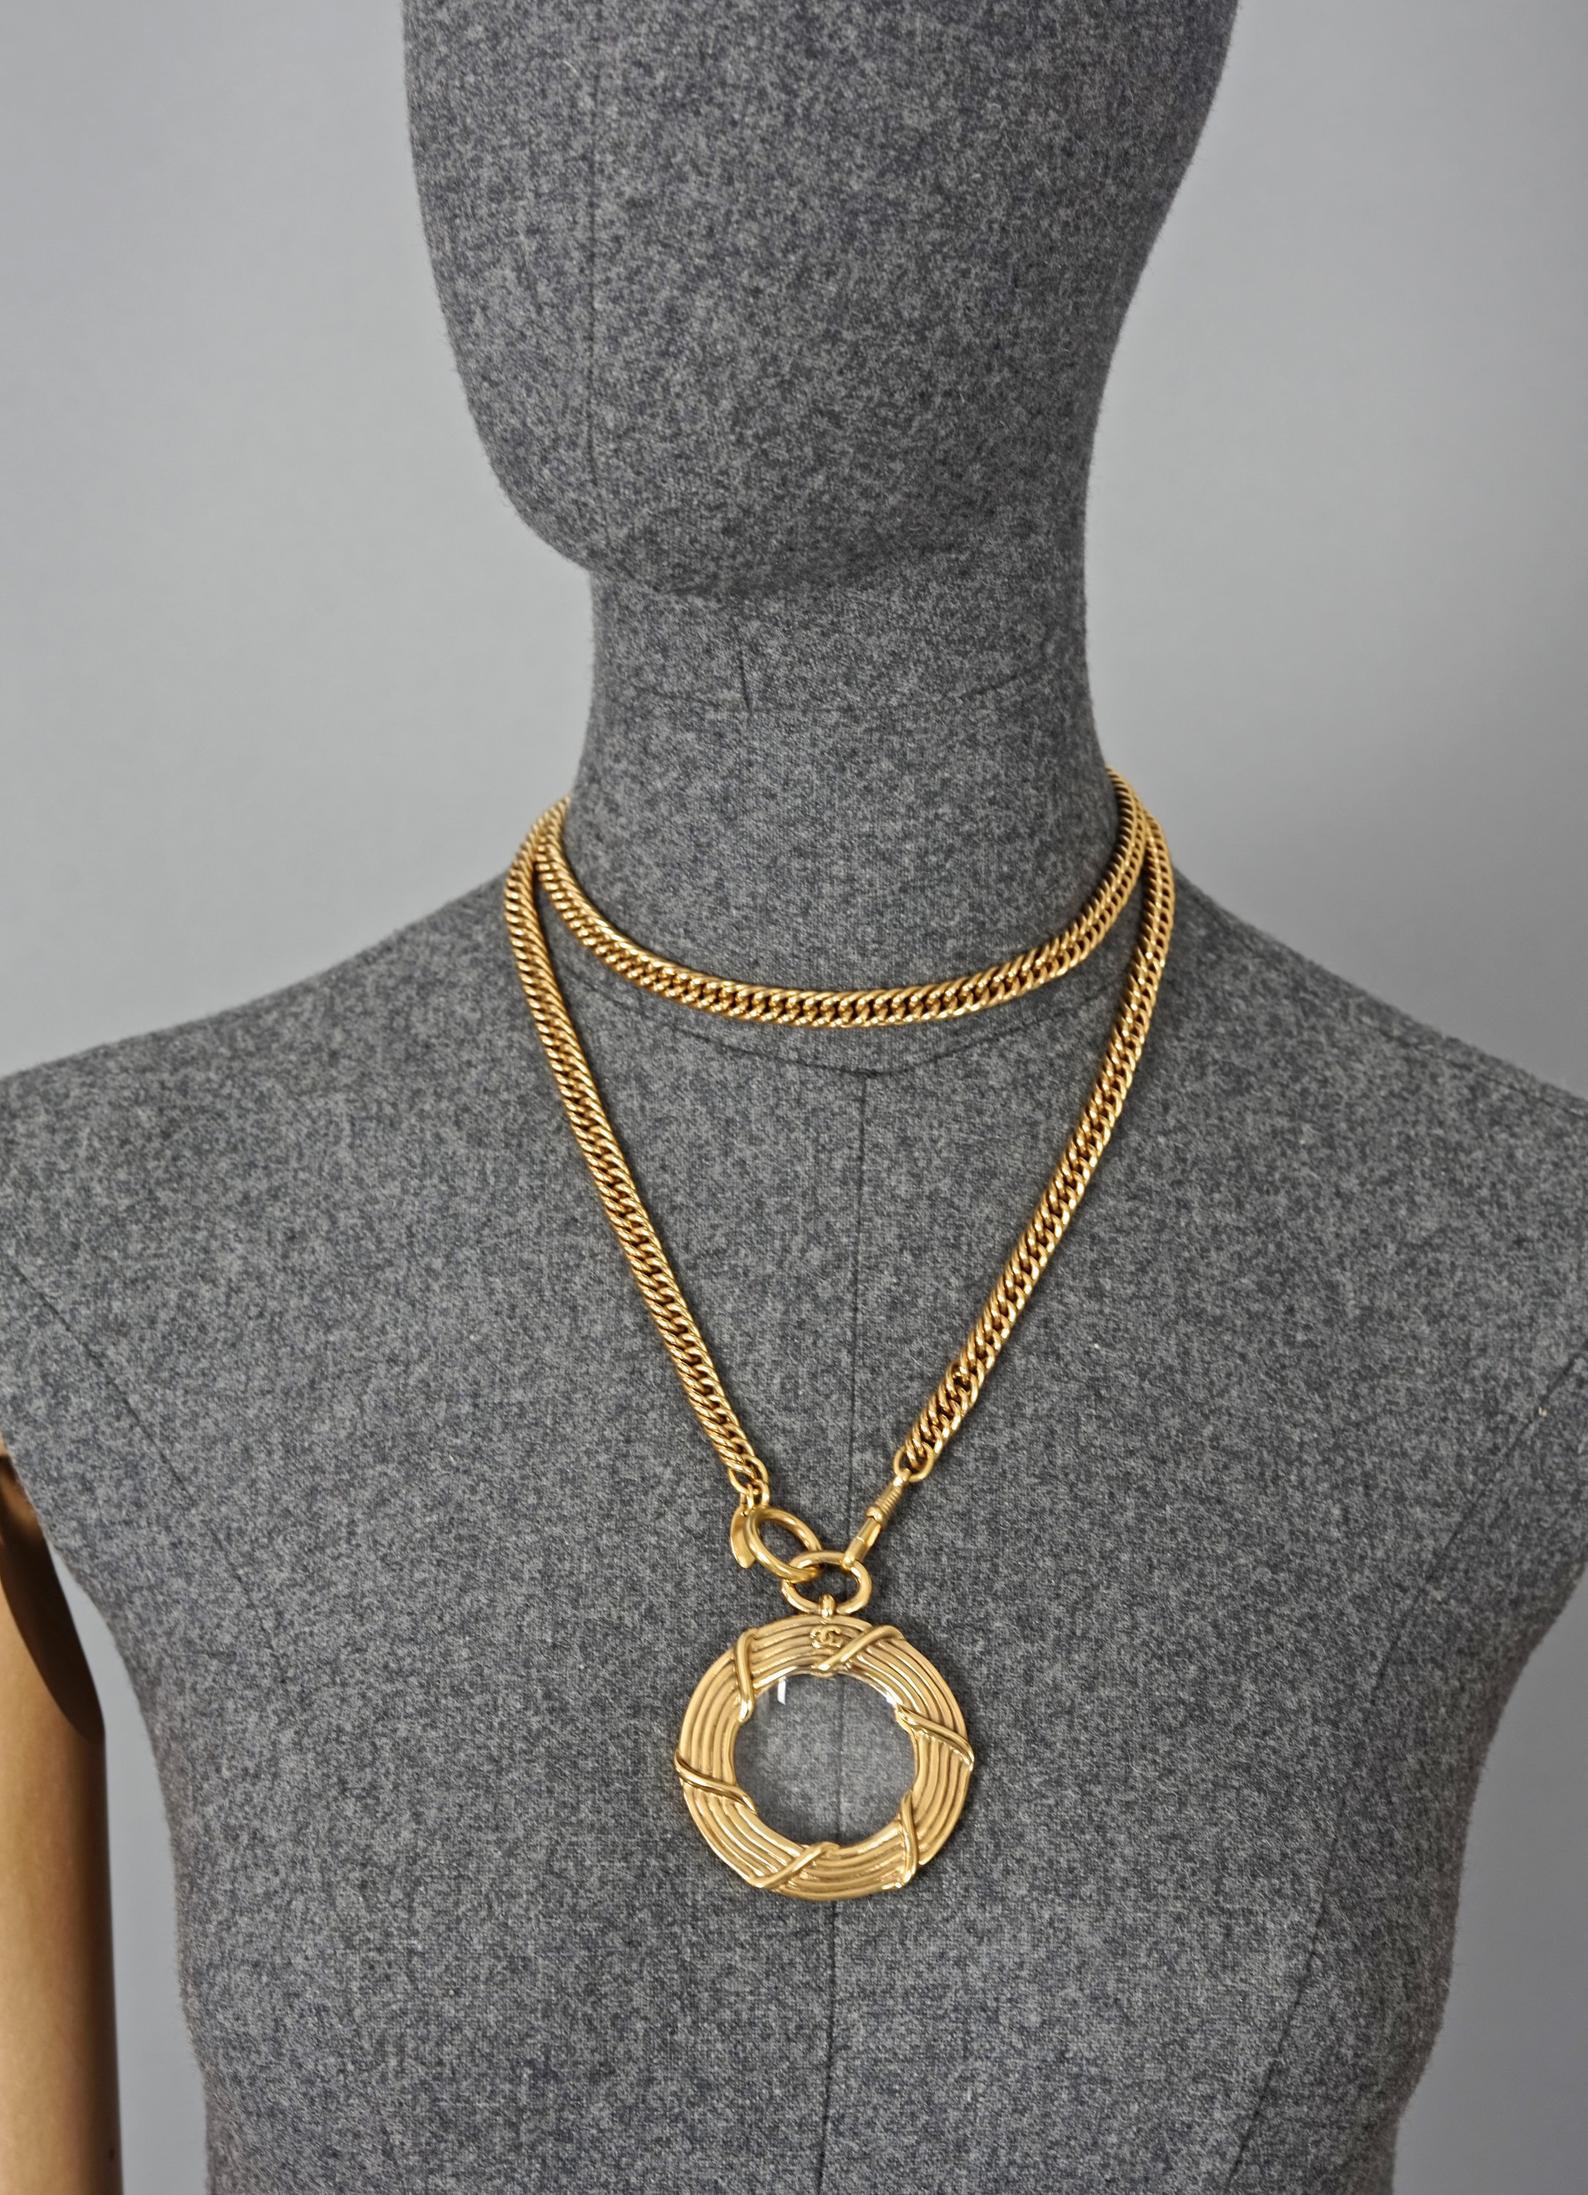 Women's or Men's Vintage CHANEL Logo Magnifying Glass Chain Necklace